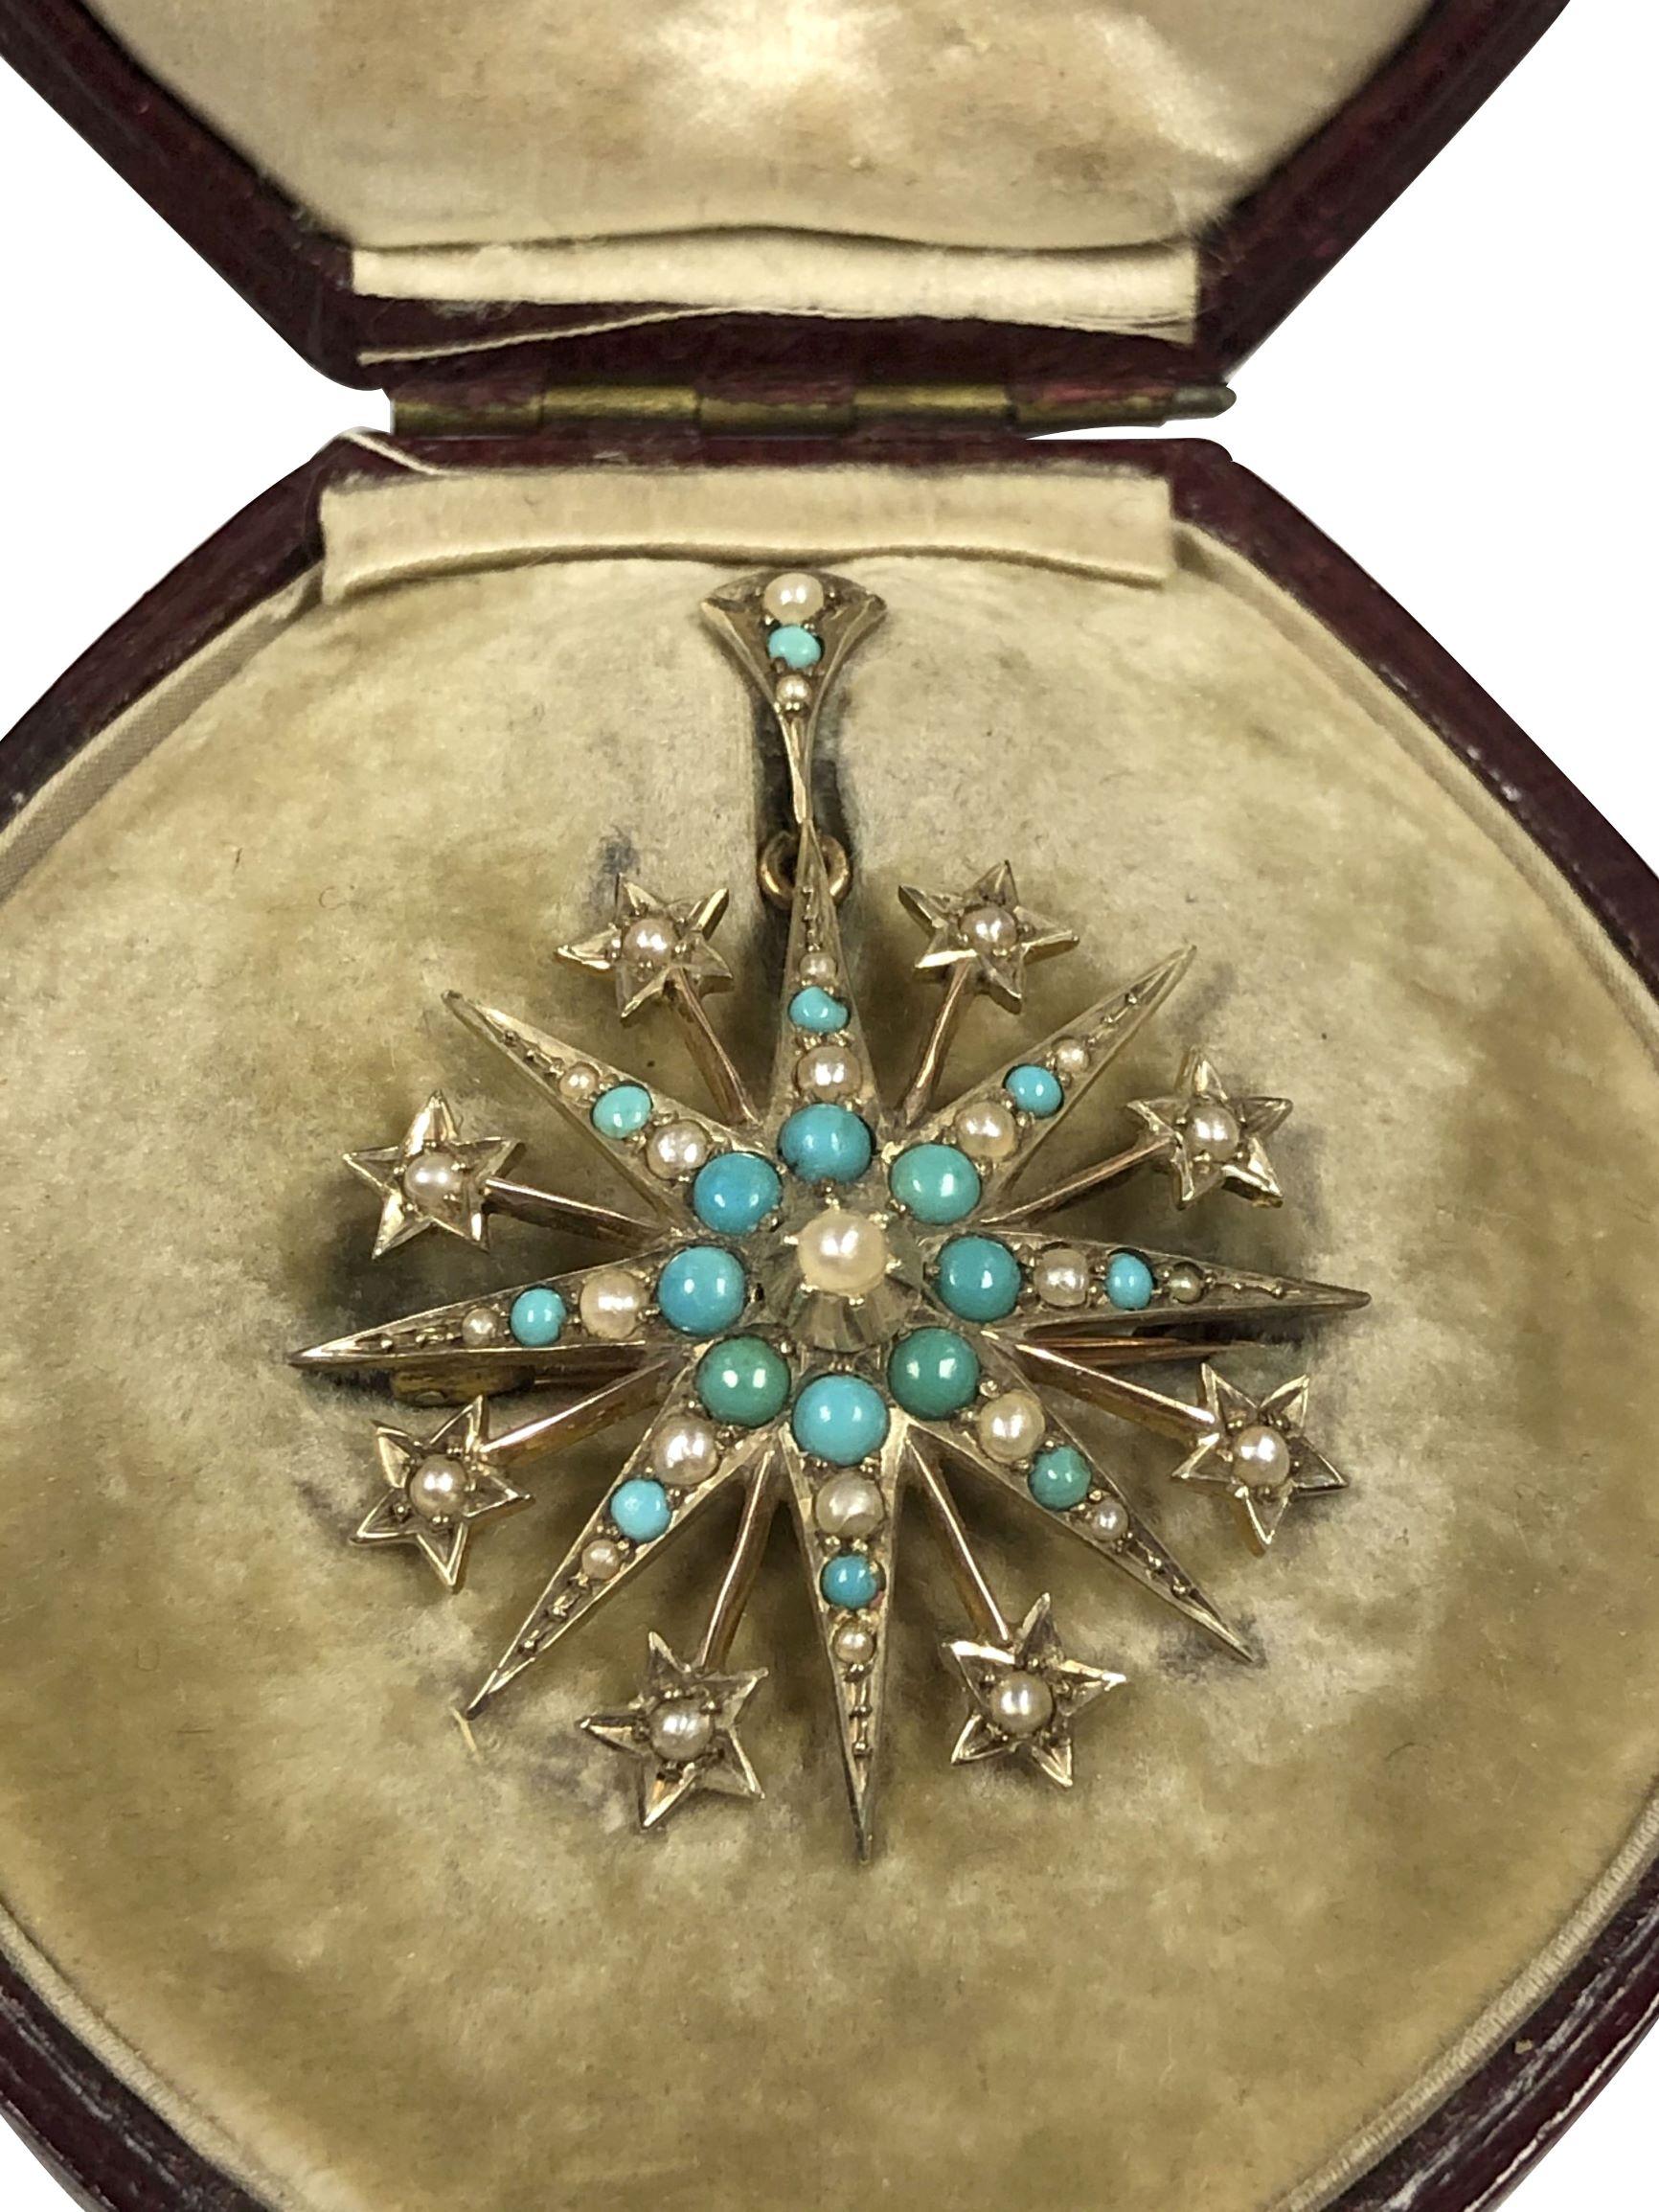 Circa 1900 Star Burst form Brooch Pendant, 9 Karat Yellow Gold and measuring 1 5/8 inches in length and 1 1/4 inches wide. Set with Turquoise and Pearls. Comes in original fitted presentation box of the original Jeweler from Liverpool England.